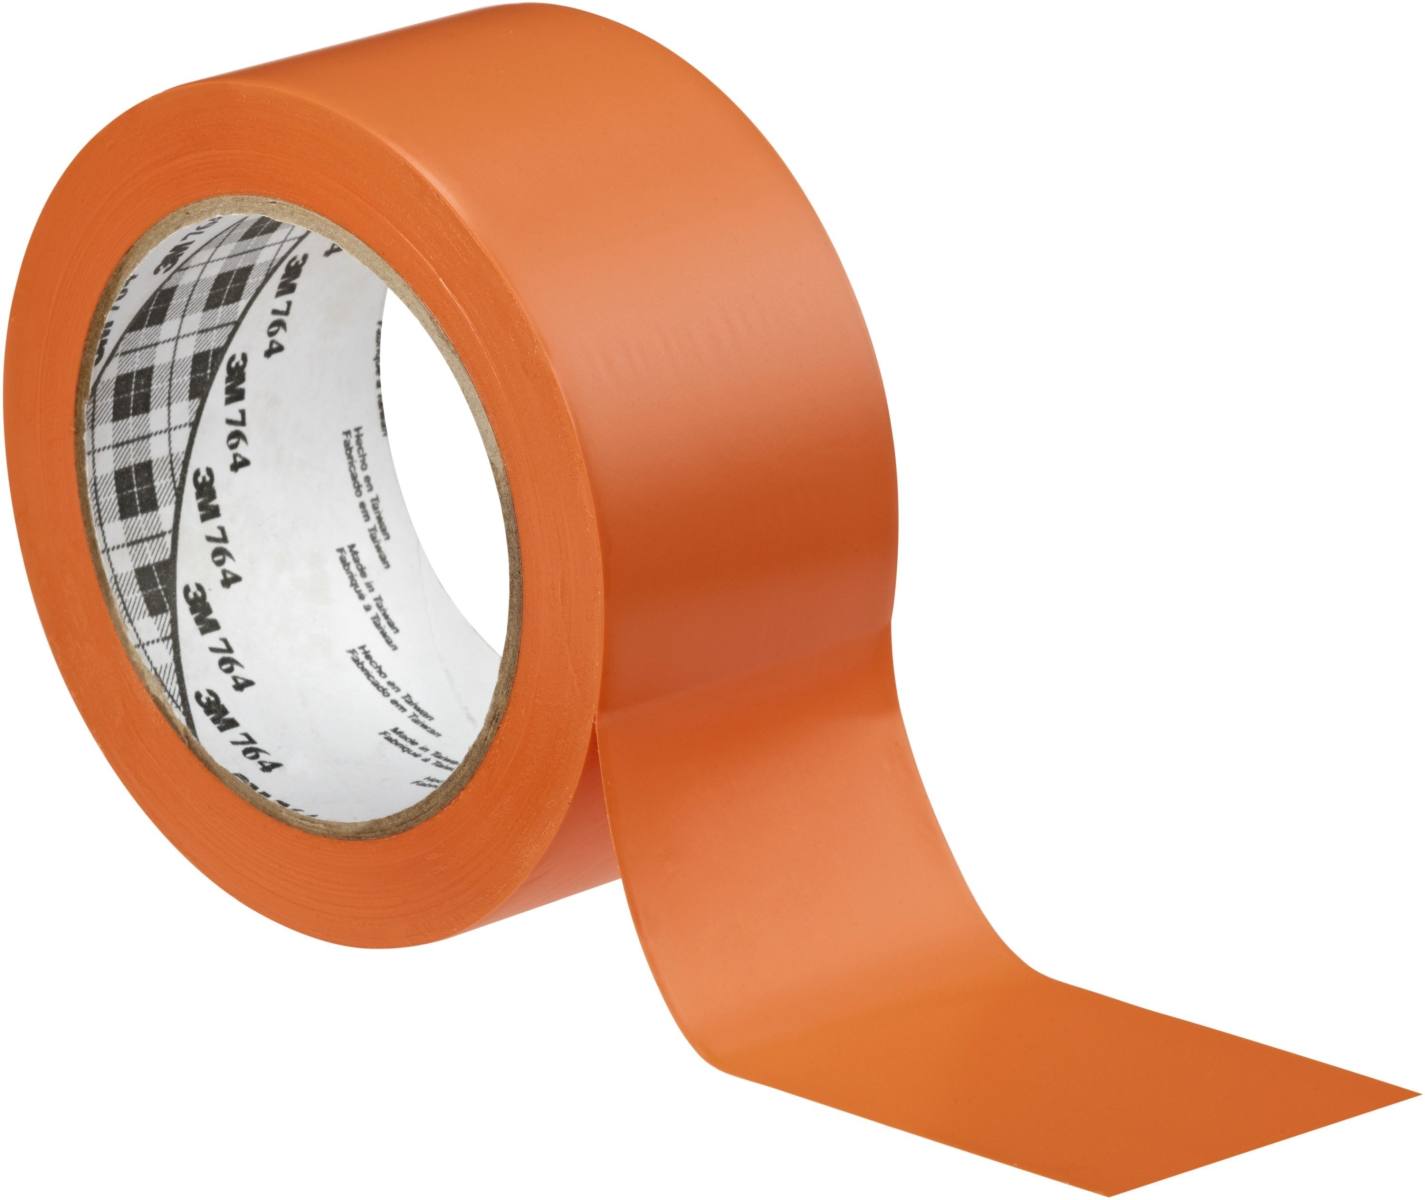 3M All-purpose PVC adhesive tape 764, orange, 50 mm x 33 m, individually packed for convenience